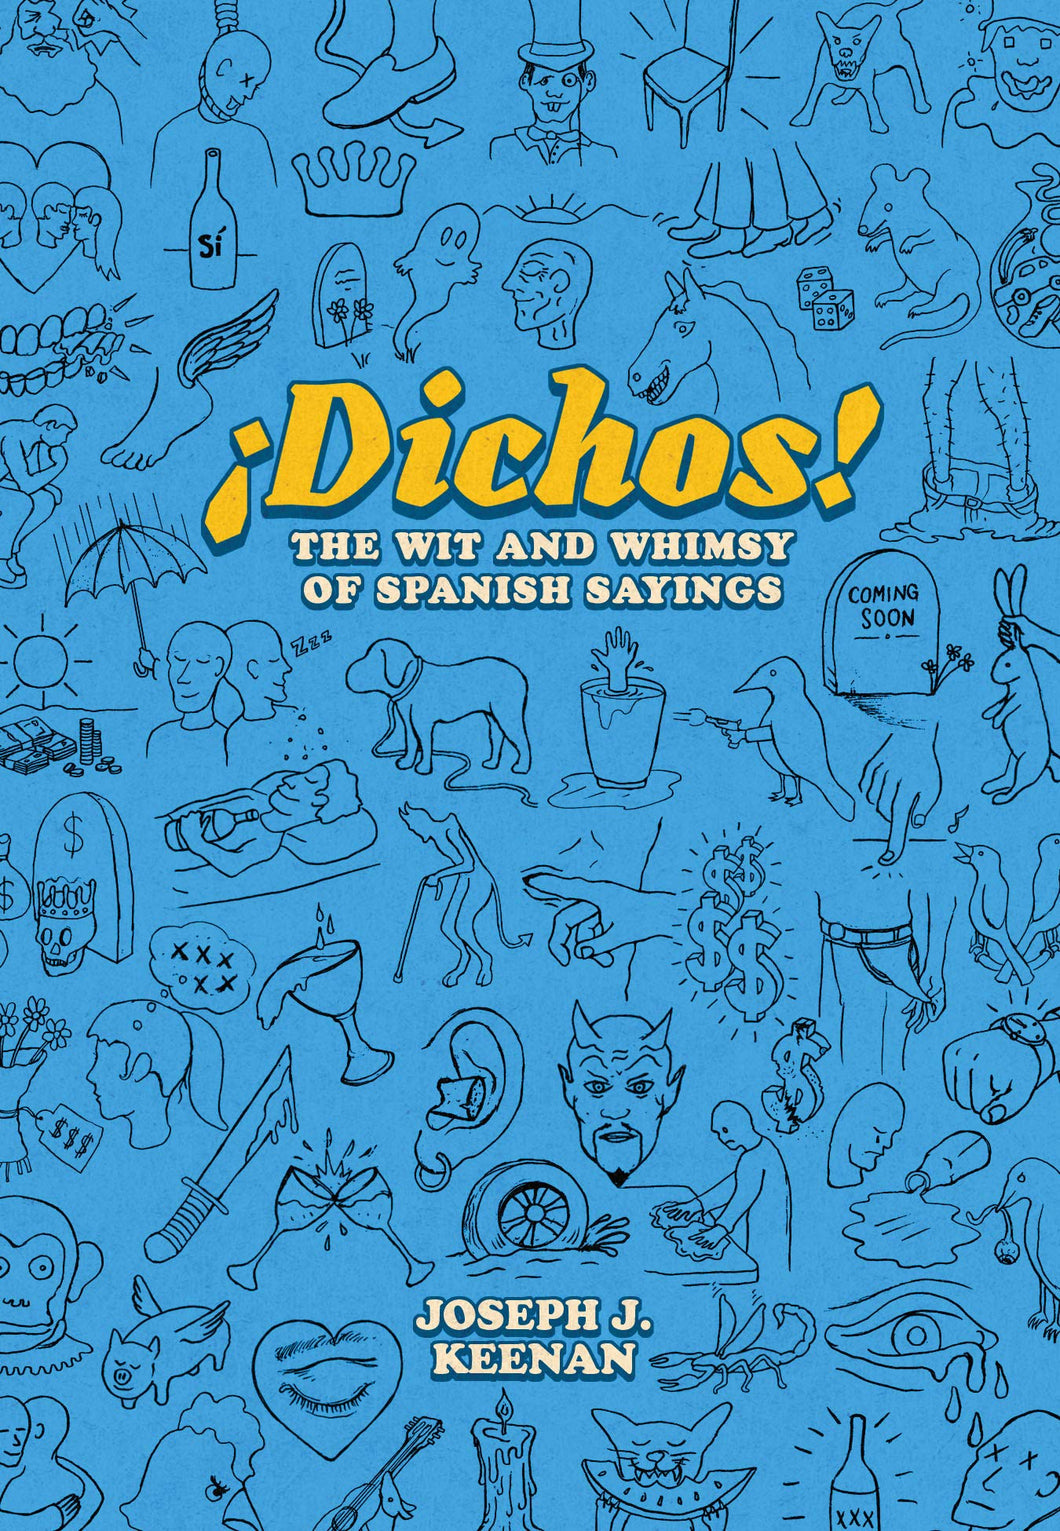 ¡Dichos! The Wit and Whimsy of Spanish Sayings by Joseph J. Keenan